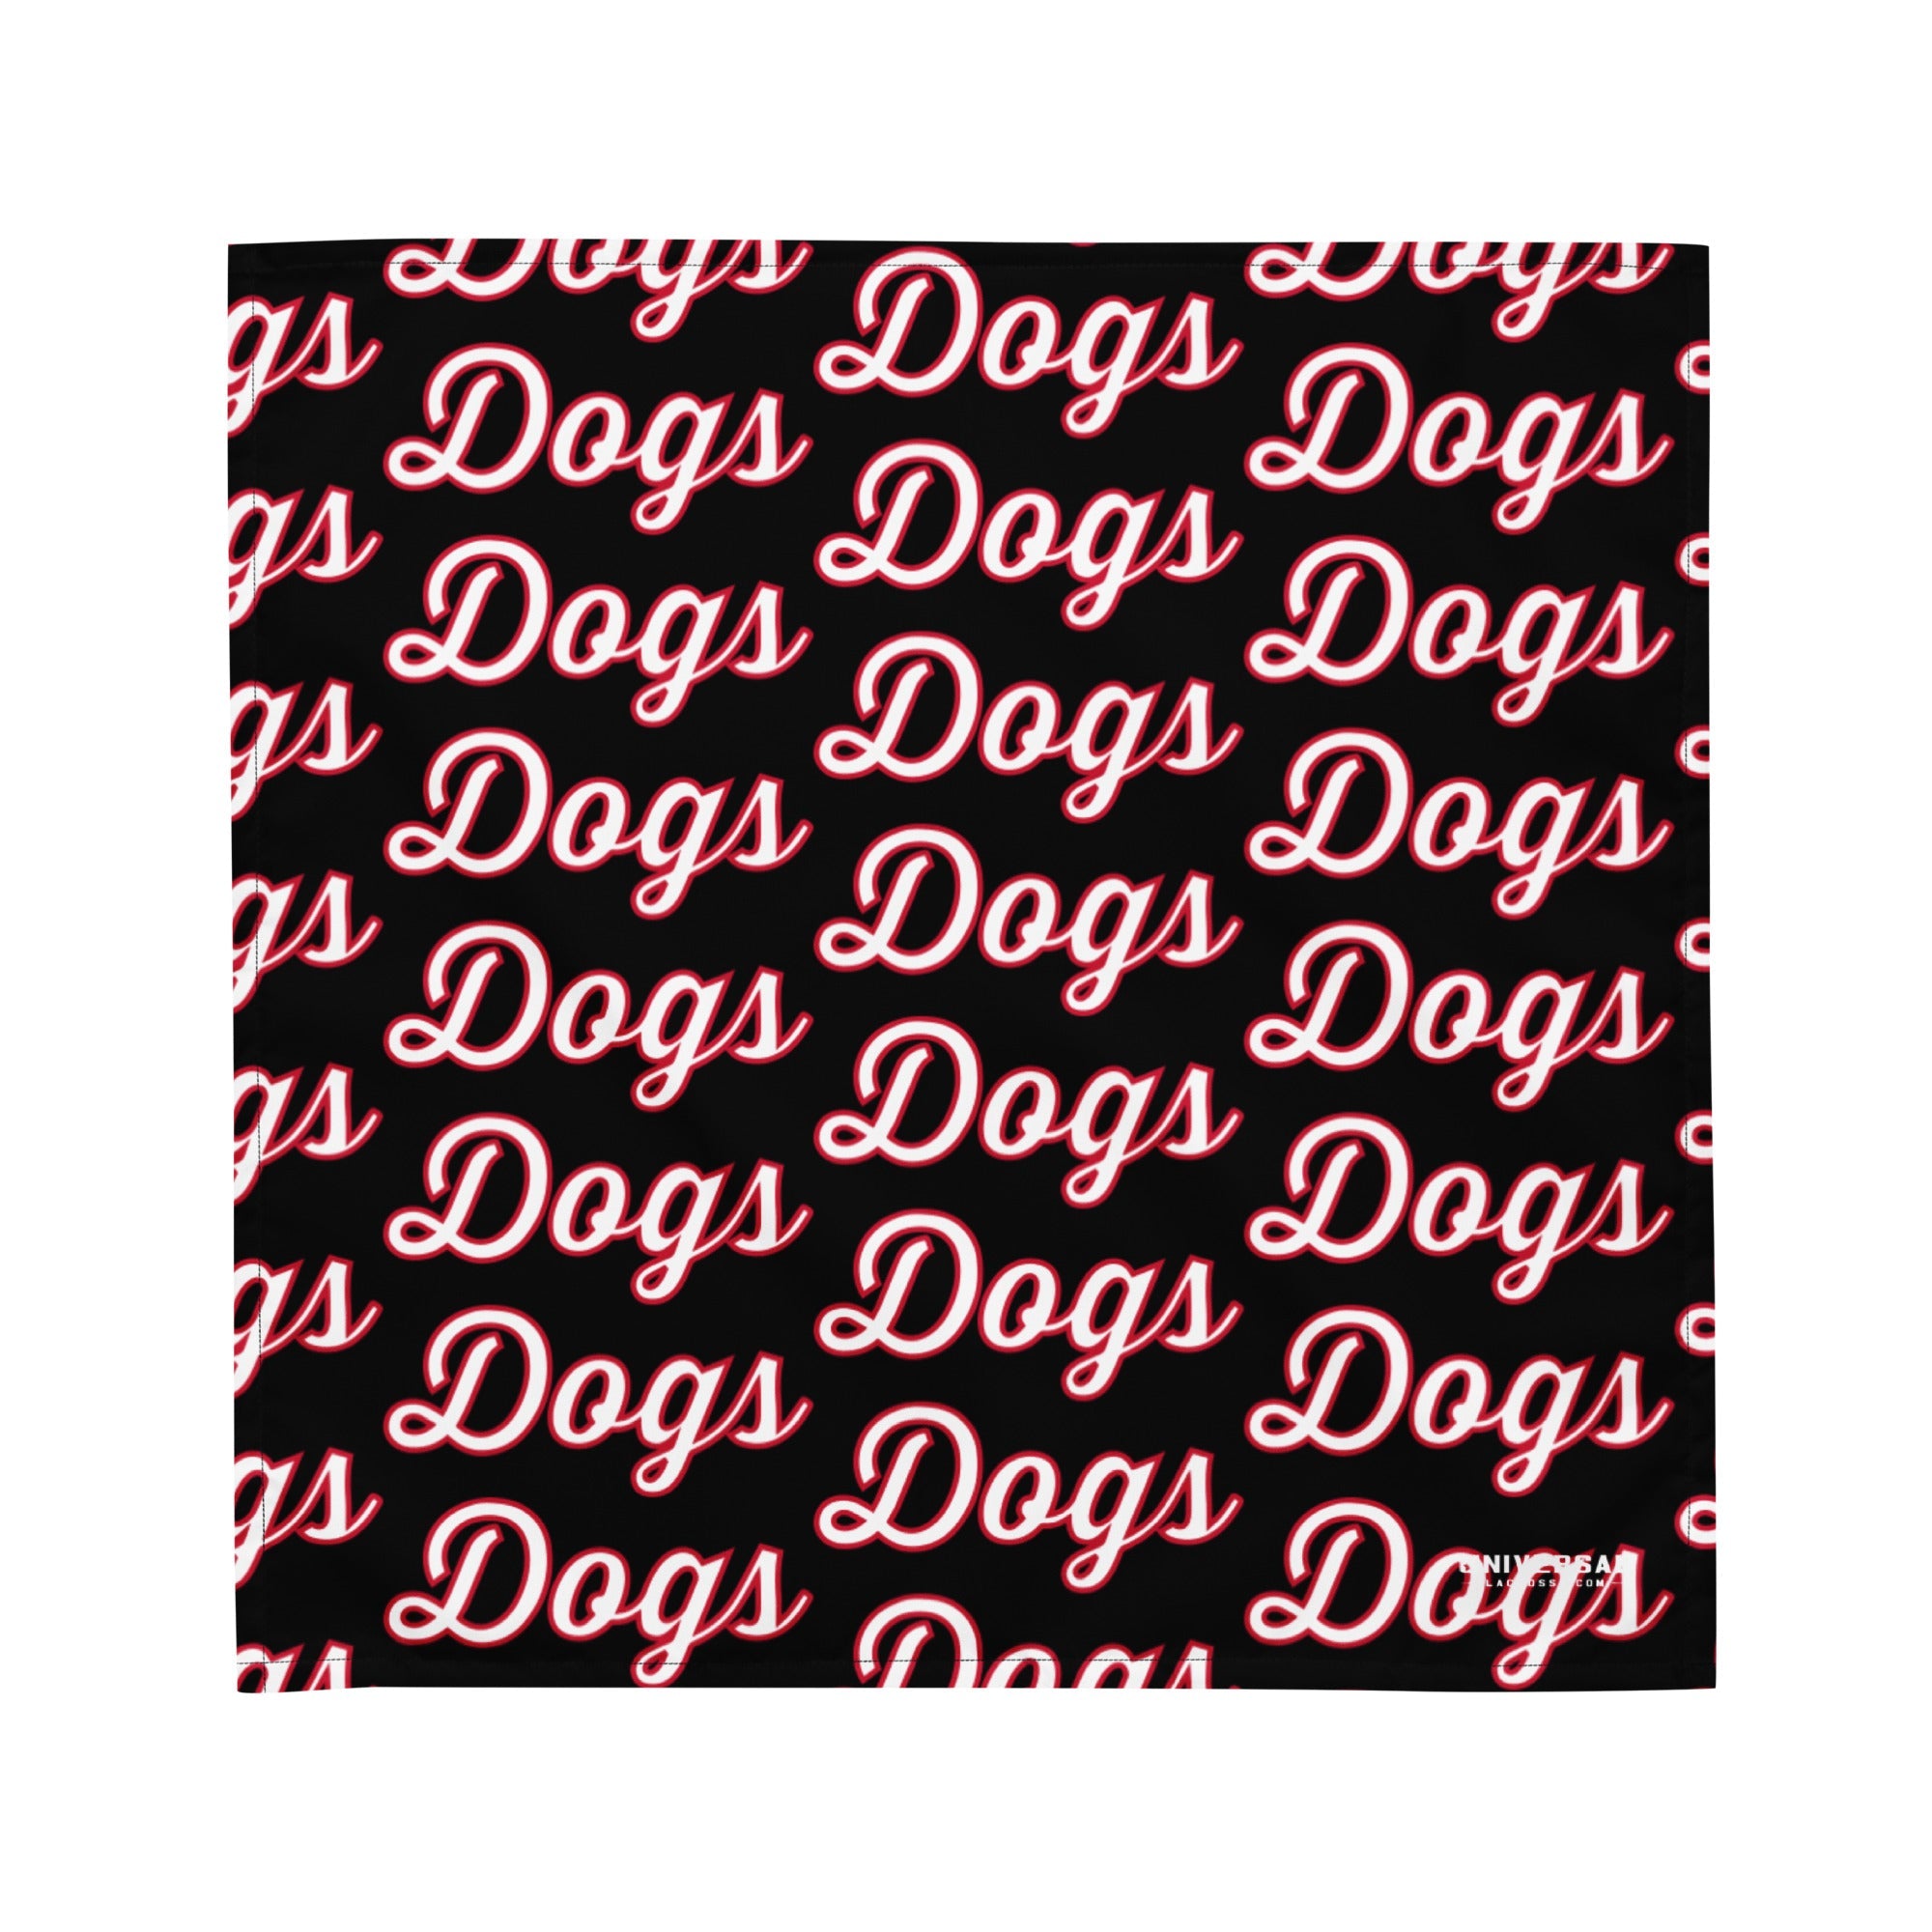 MD Dogs All-over print bandana